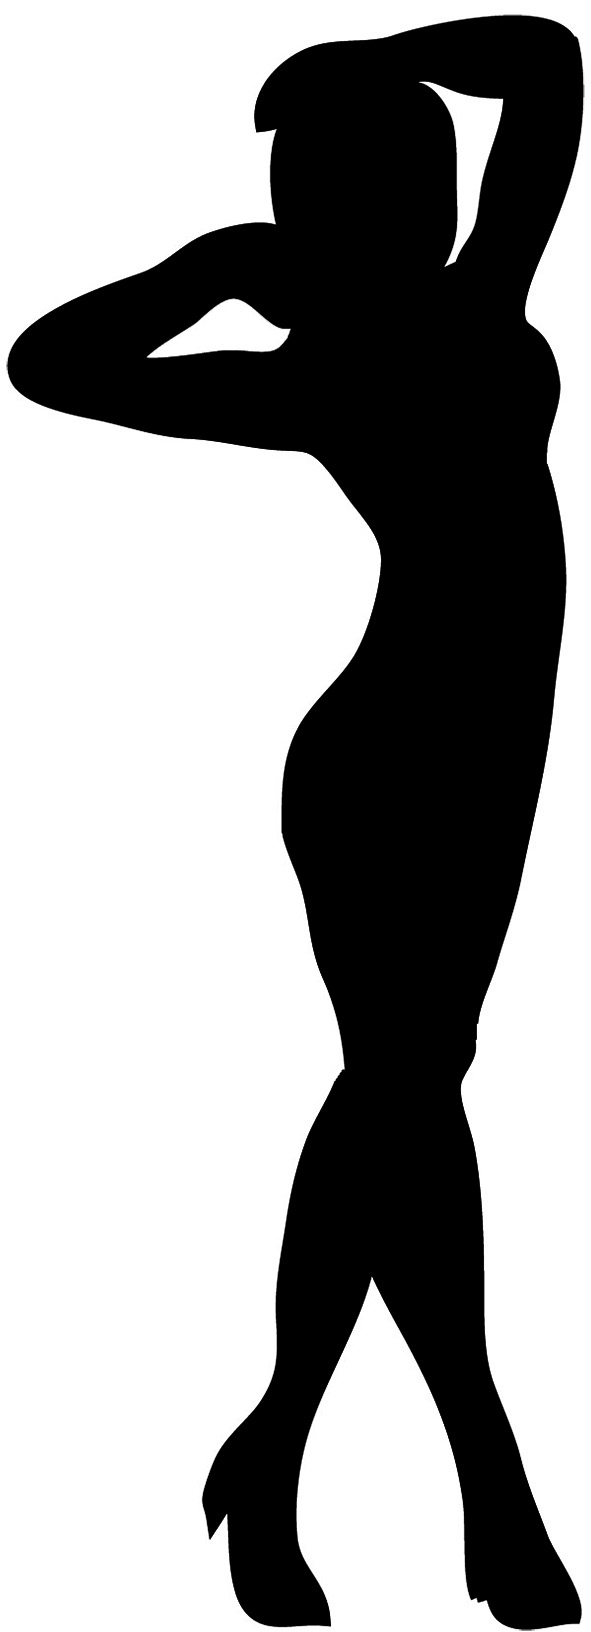 Woman Standing Clipart   Clipart Panda   Free Clipart Images